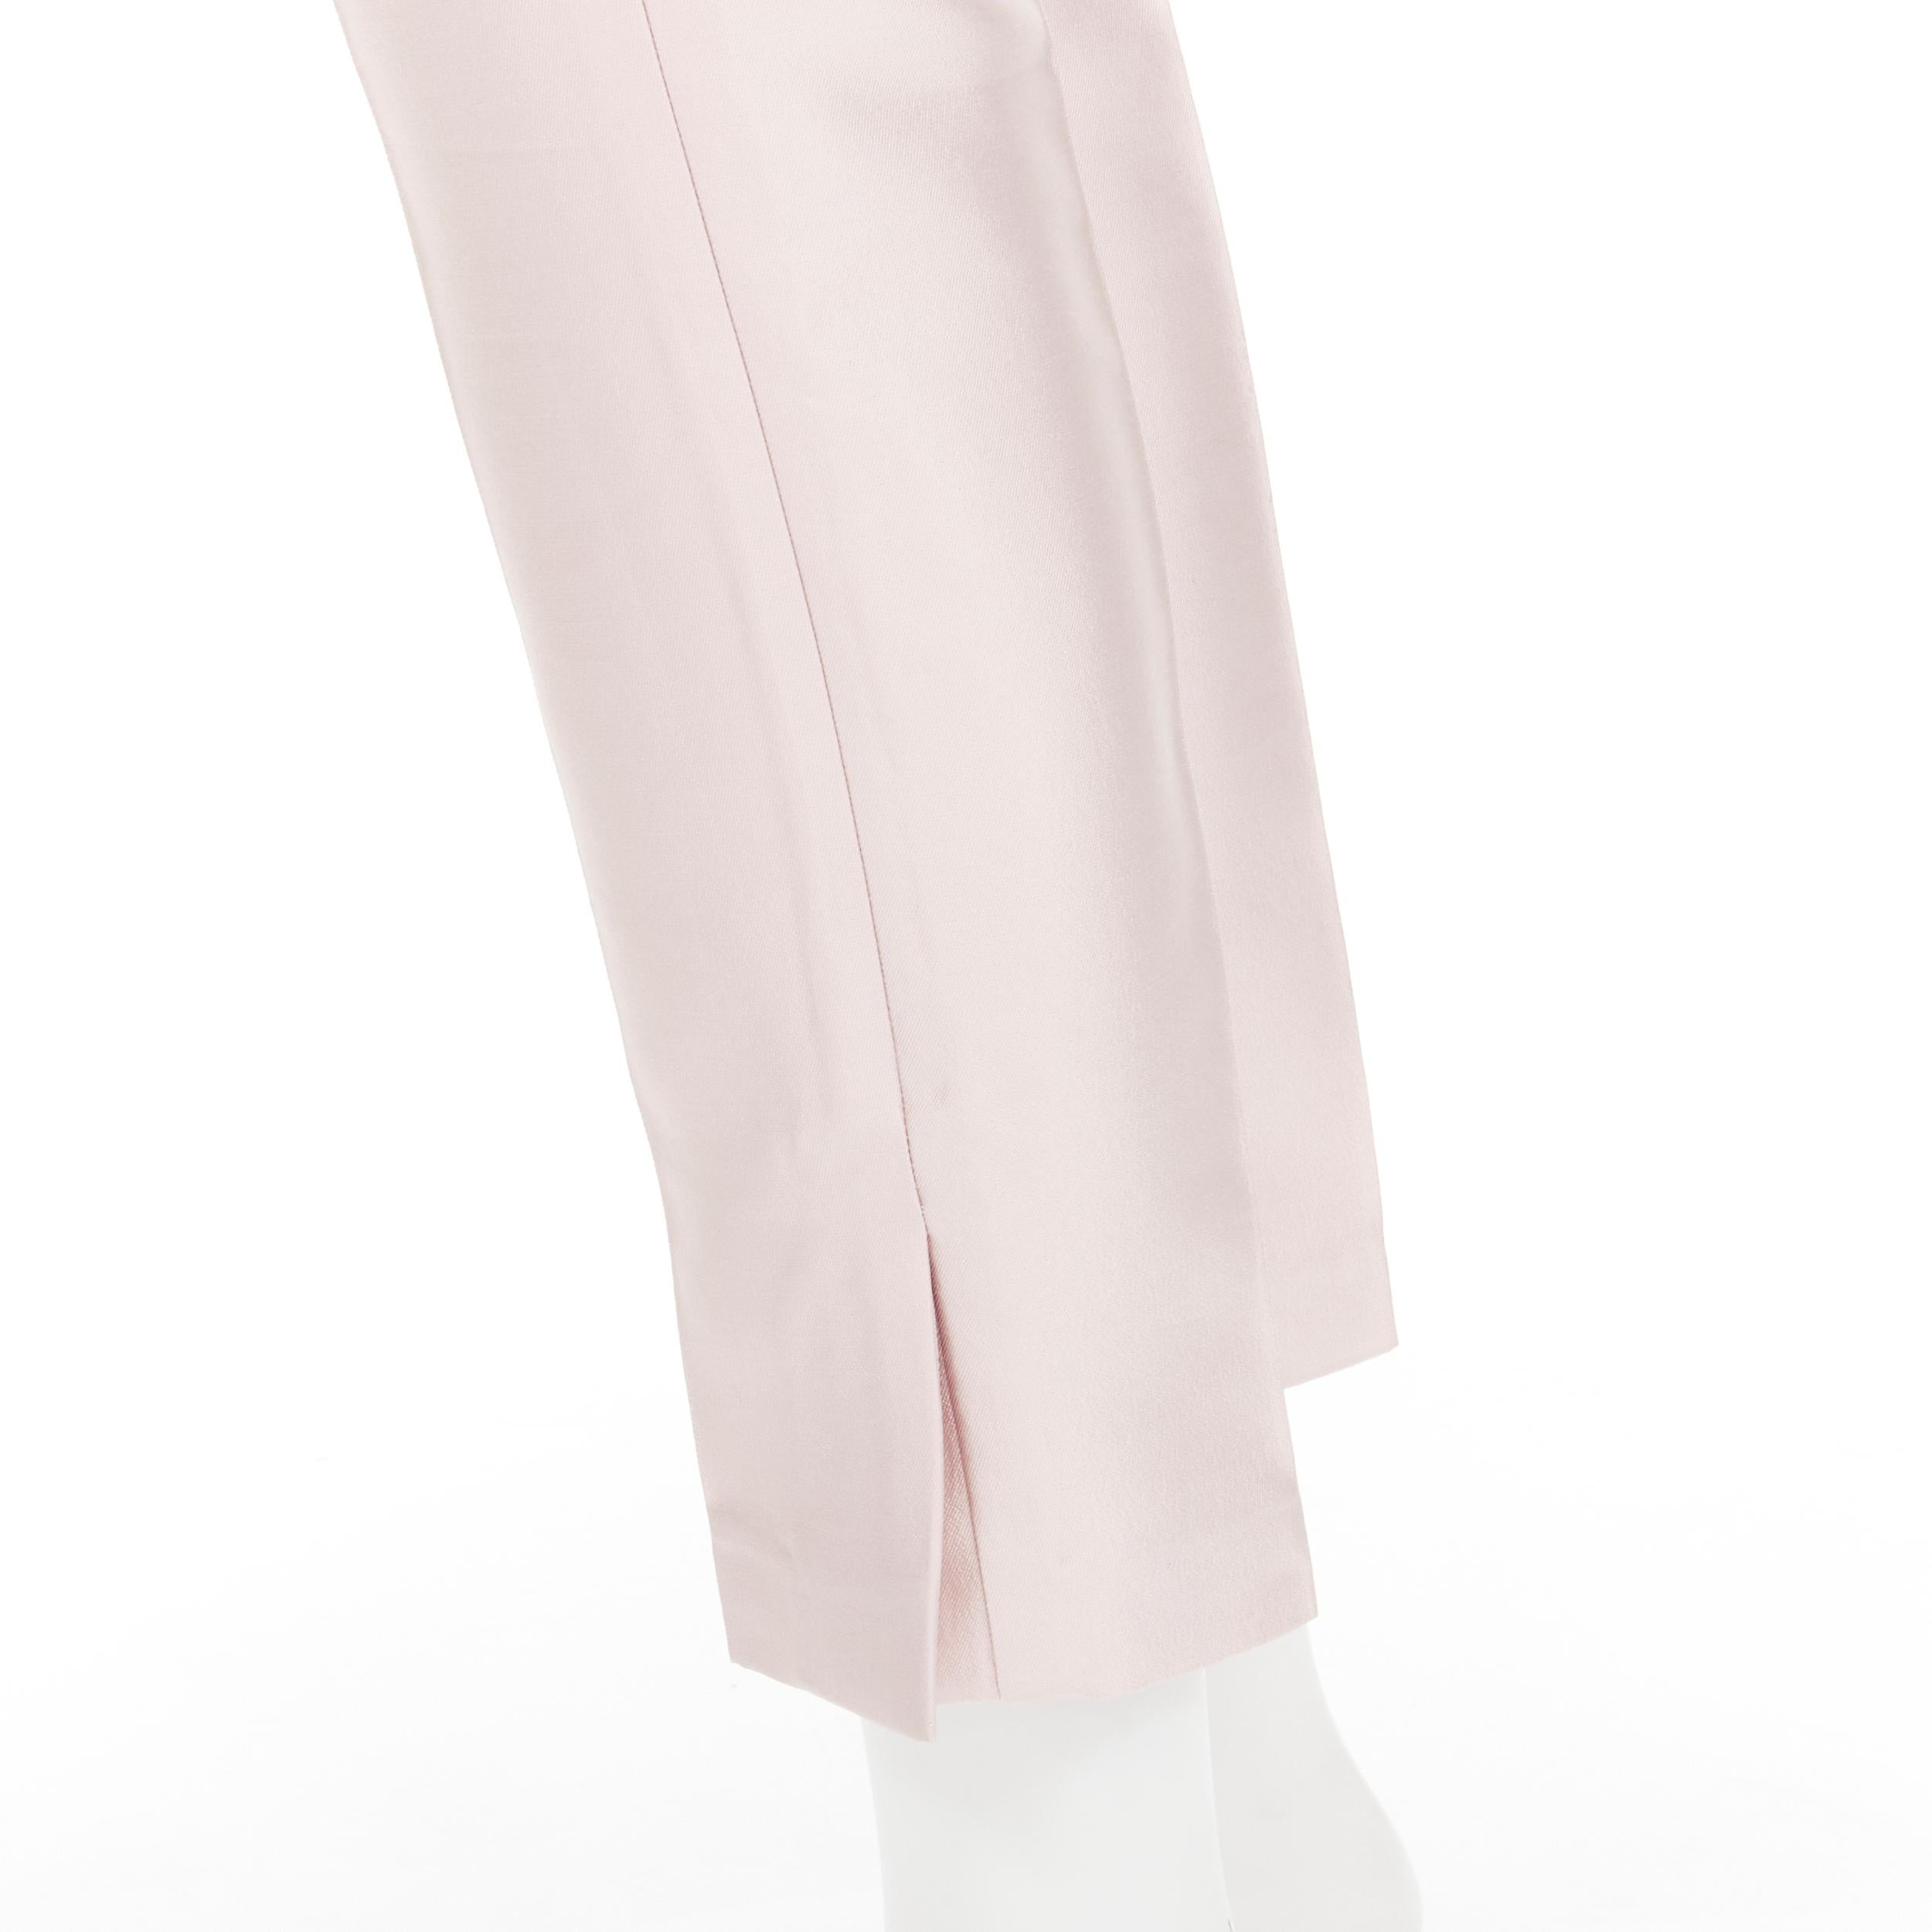 GABRIELA HEARST blush pink silk wool blend high rise cropped trousers IT34 XS
Brand: Gabriela Hearst
Material: Silk
Color: Pink
Pattern: Solid
Closure: Zip
Extra Detail: Side zip closure. Dart at waist or fit. Side slit at hem.
Made in: